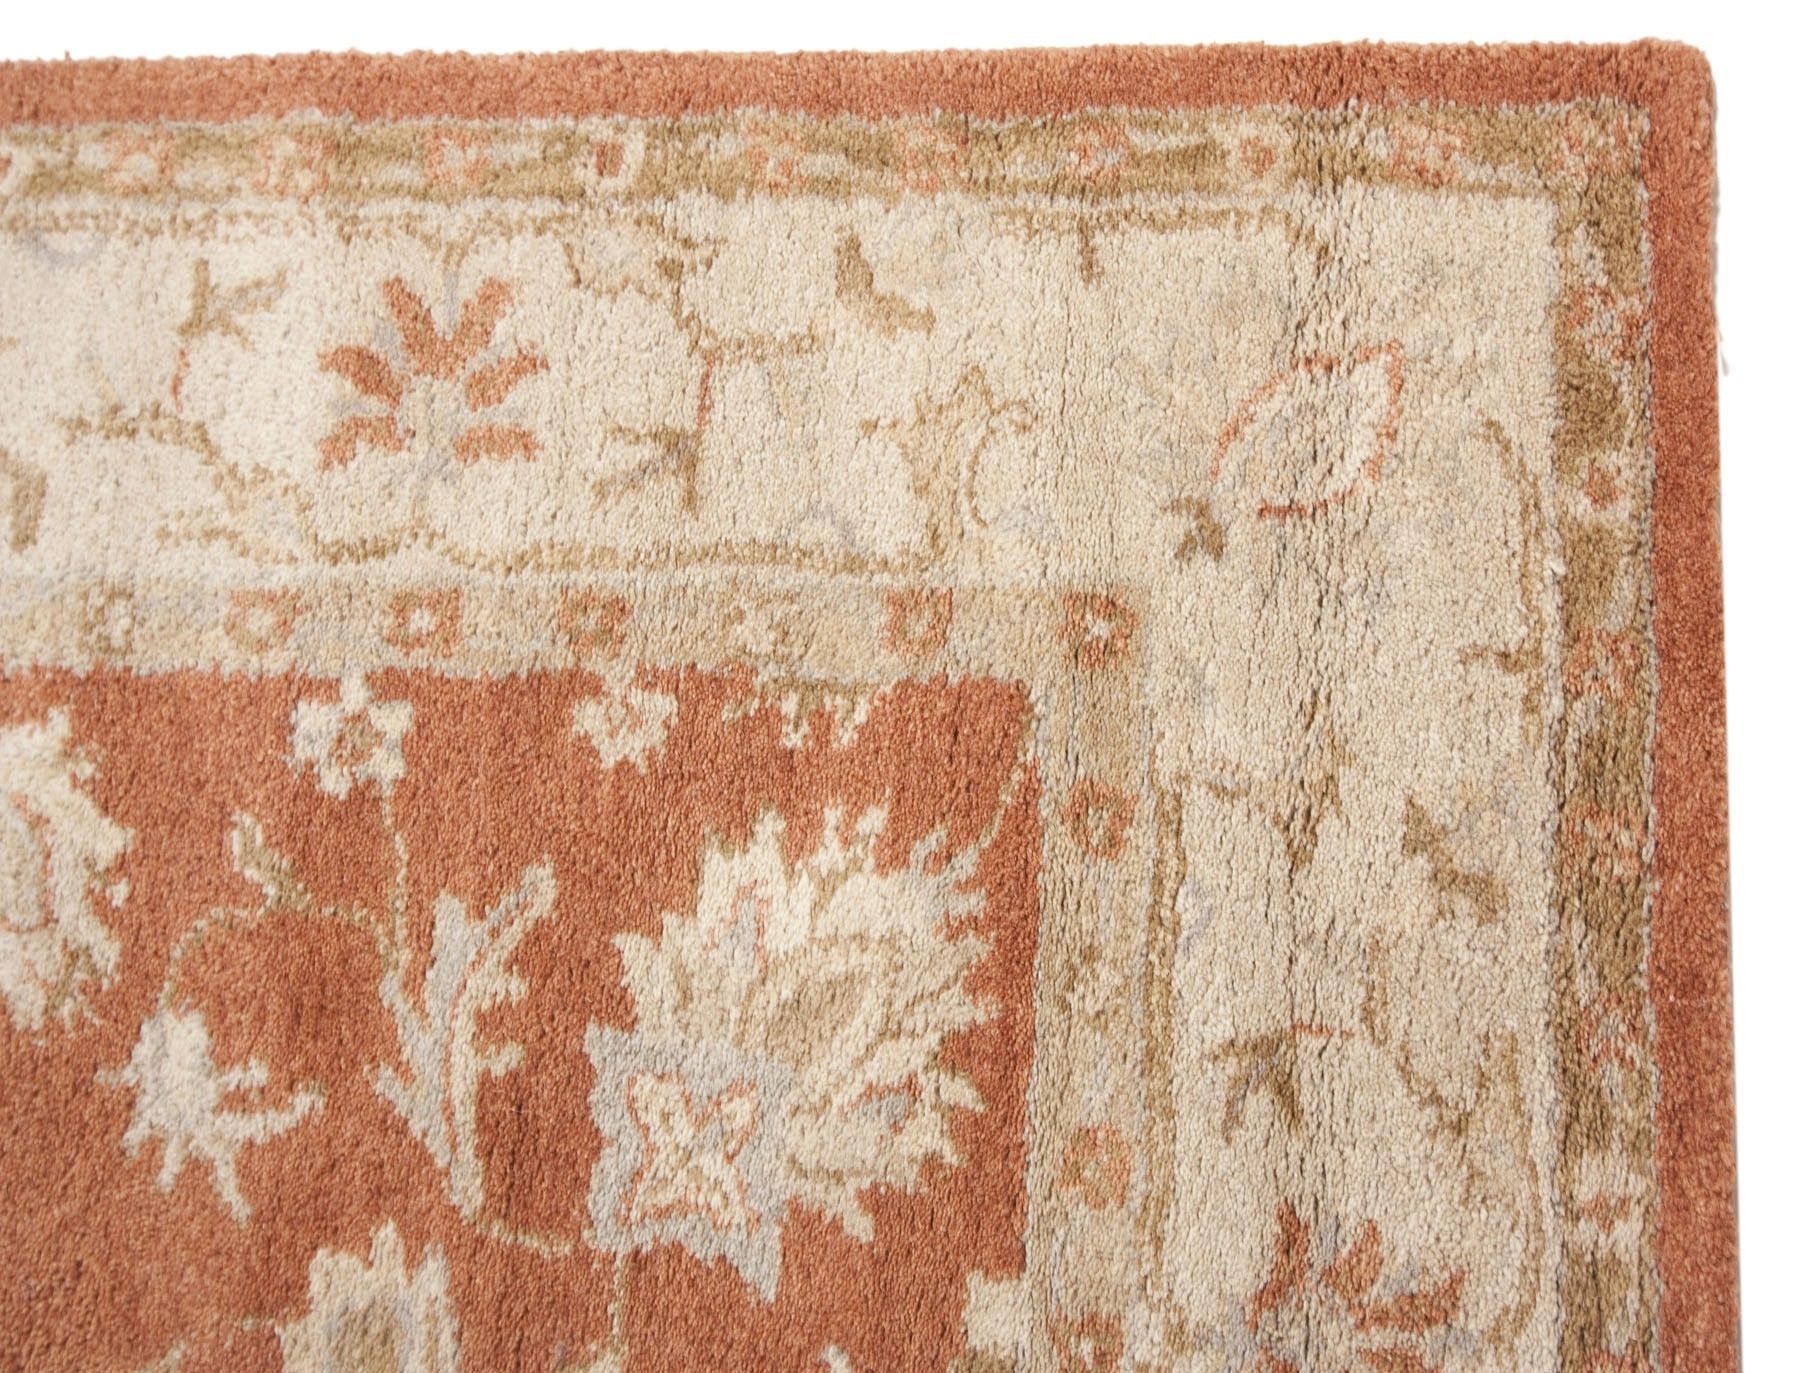 Large Wool Area Rugs Roselawnlutheran With Traditional Wool Area Rugs (View 11 of 15)